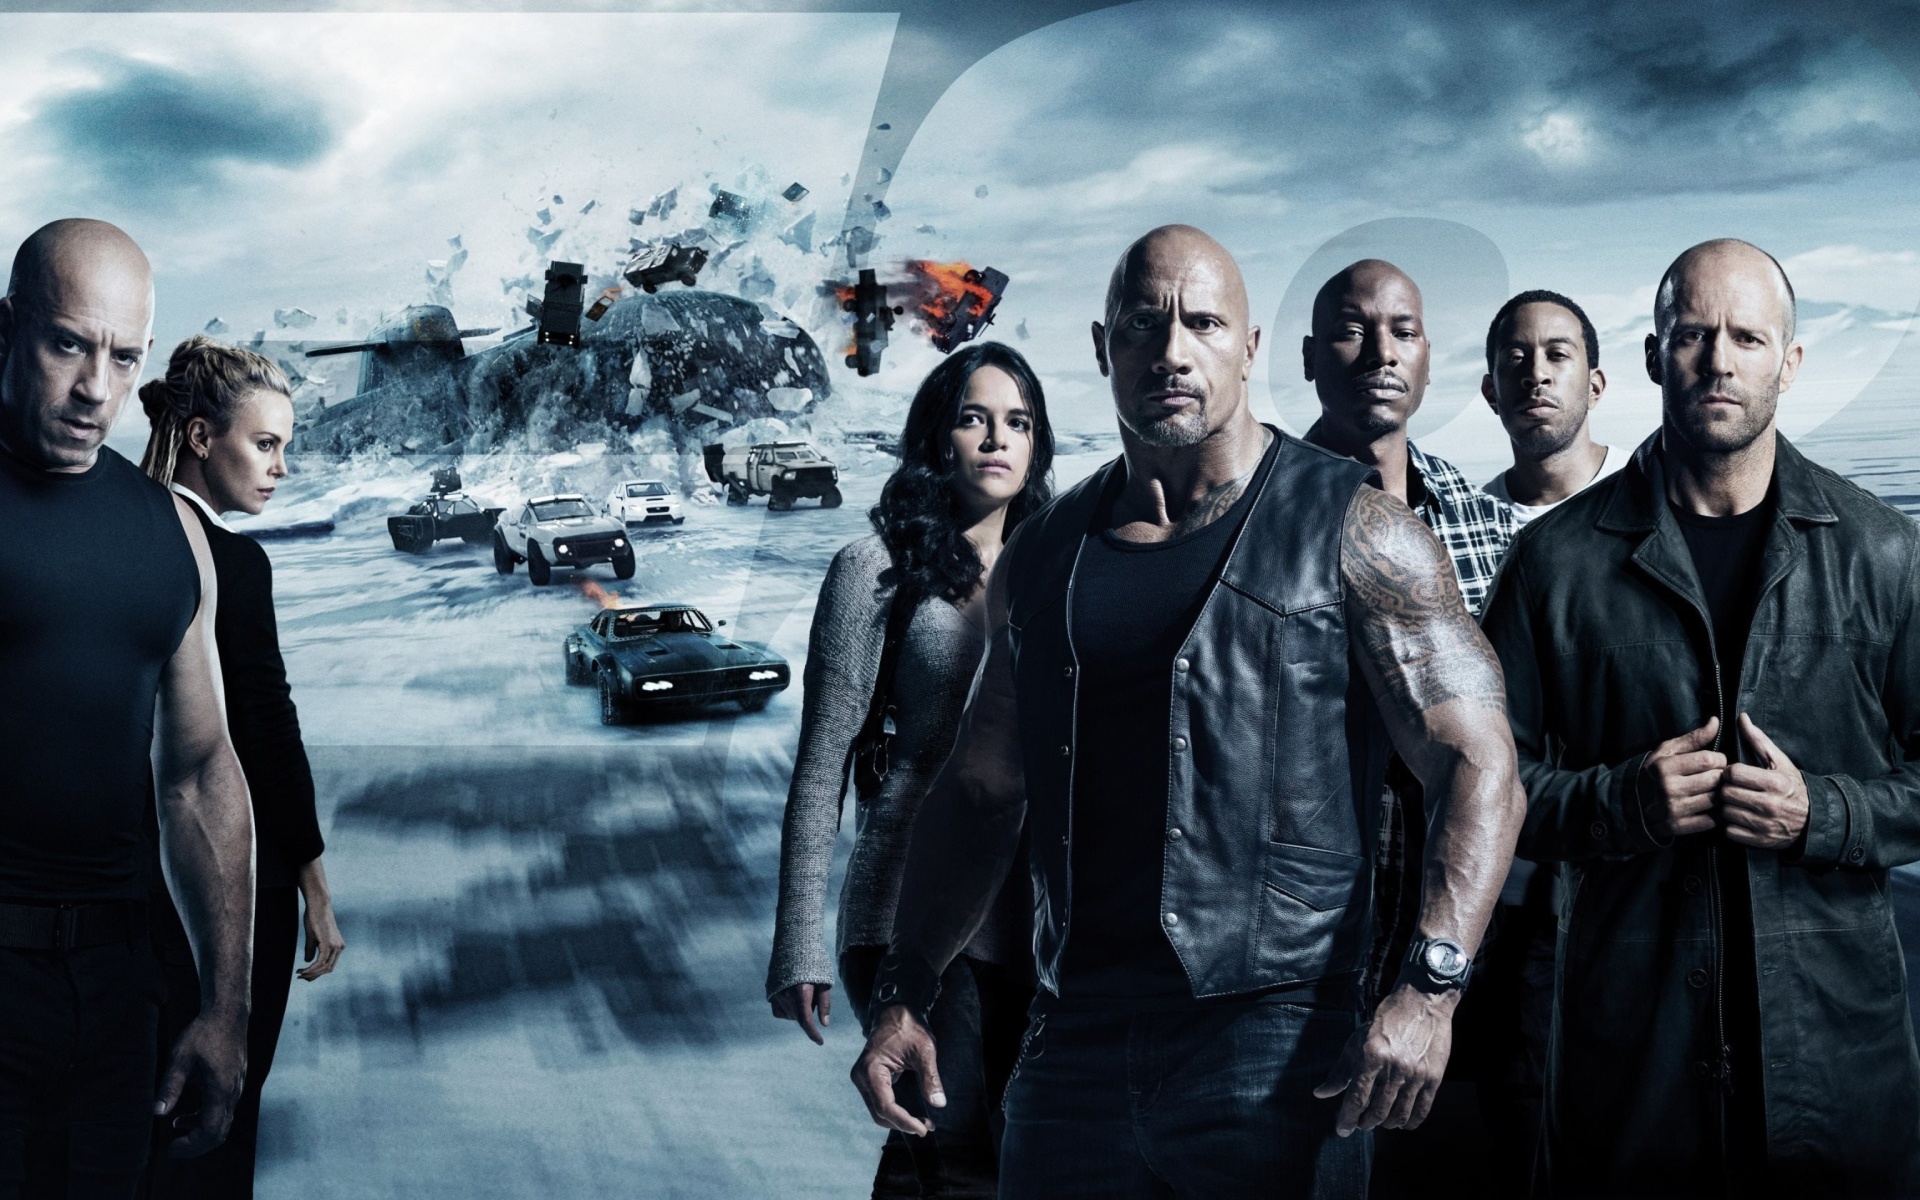 The Fate of the Furious with Vin Diesel, Dwayne Johnson, Charlize Theron wallpaper 1920x1200